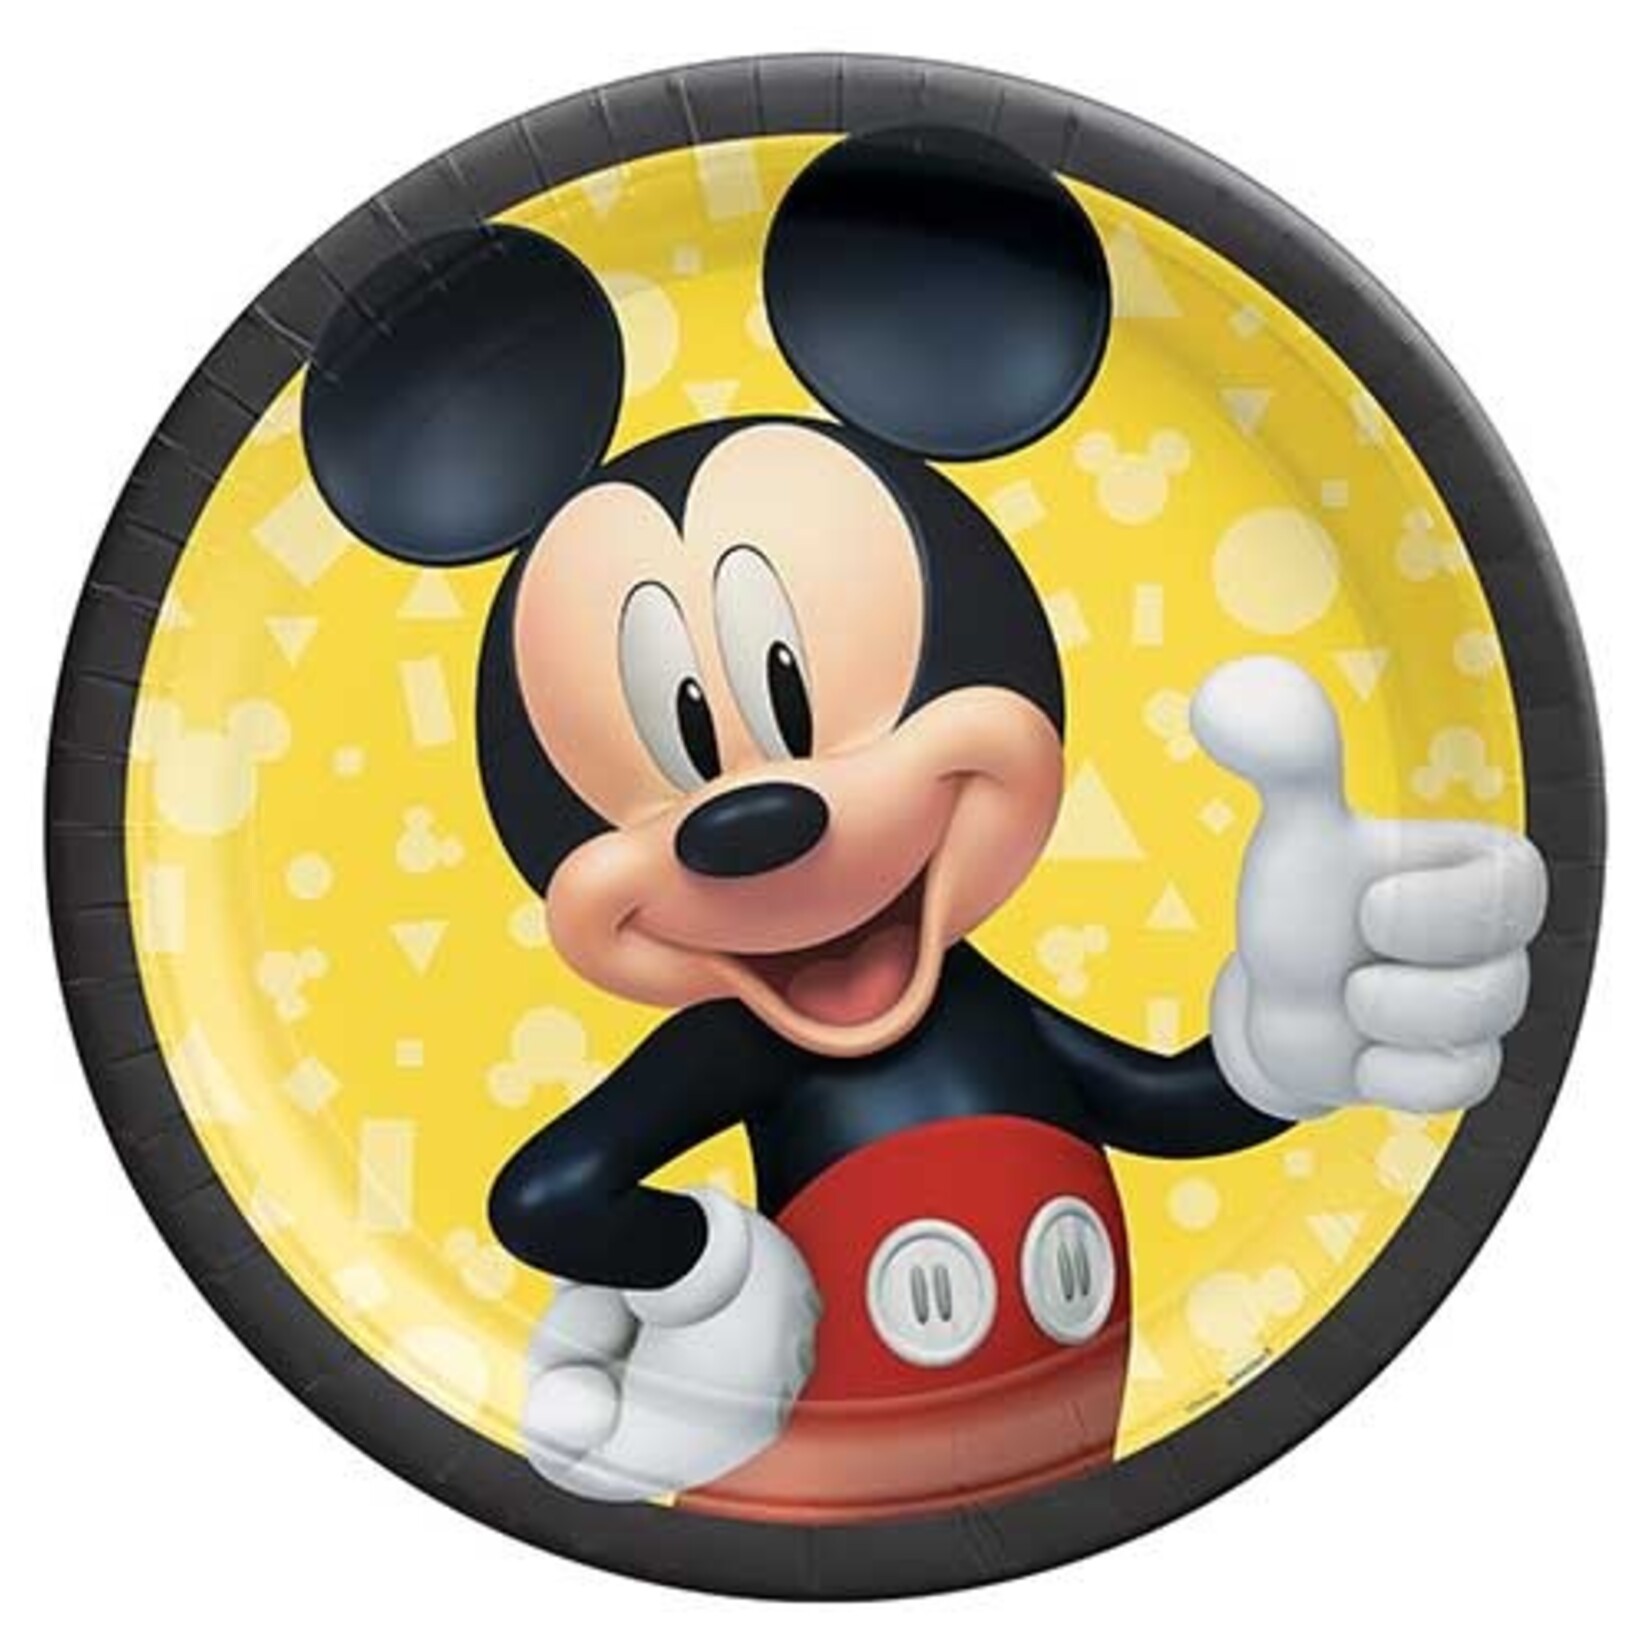 Amscan 9" Mickey Mouse Birthday Plates - 8ct.